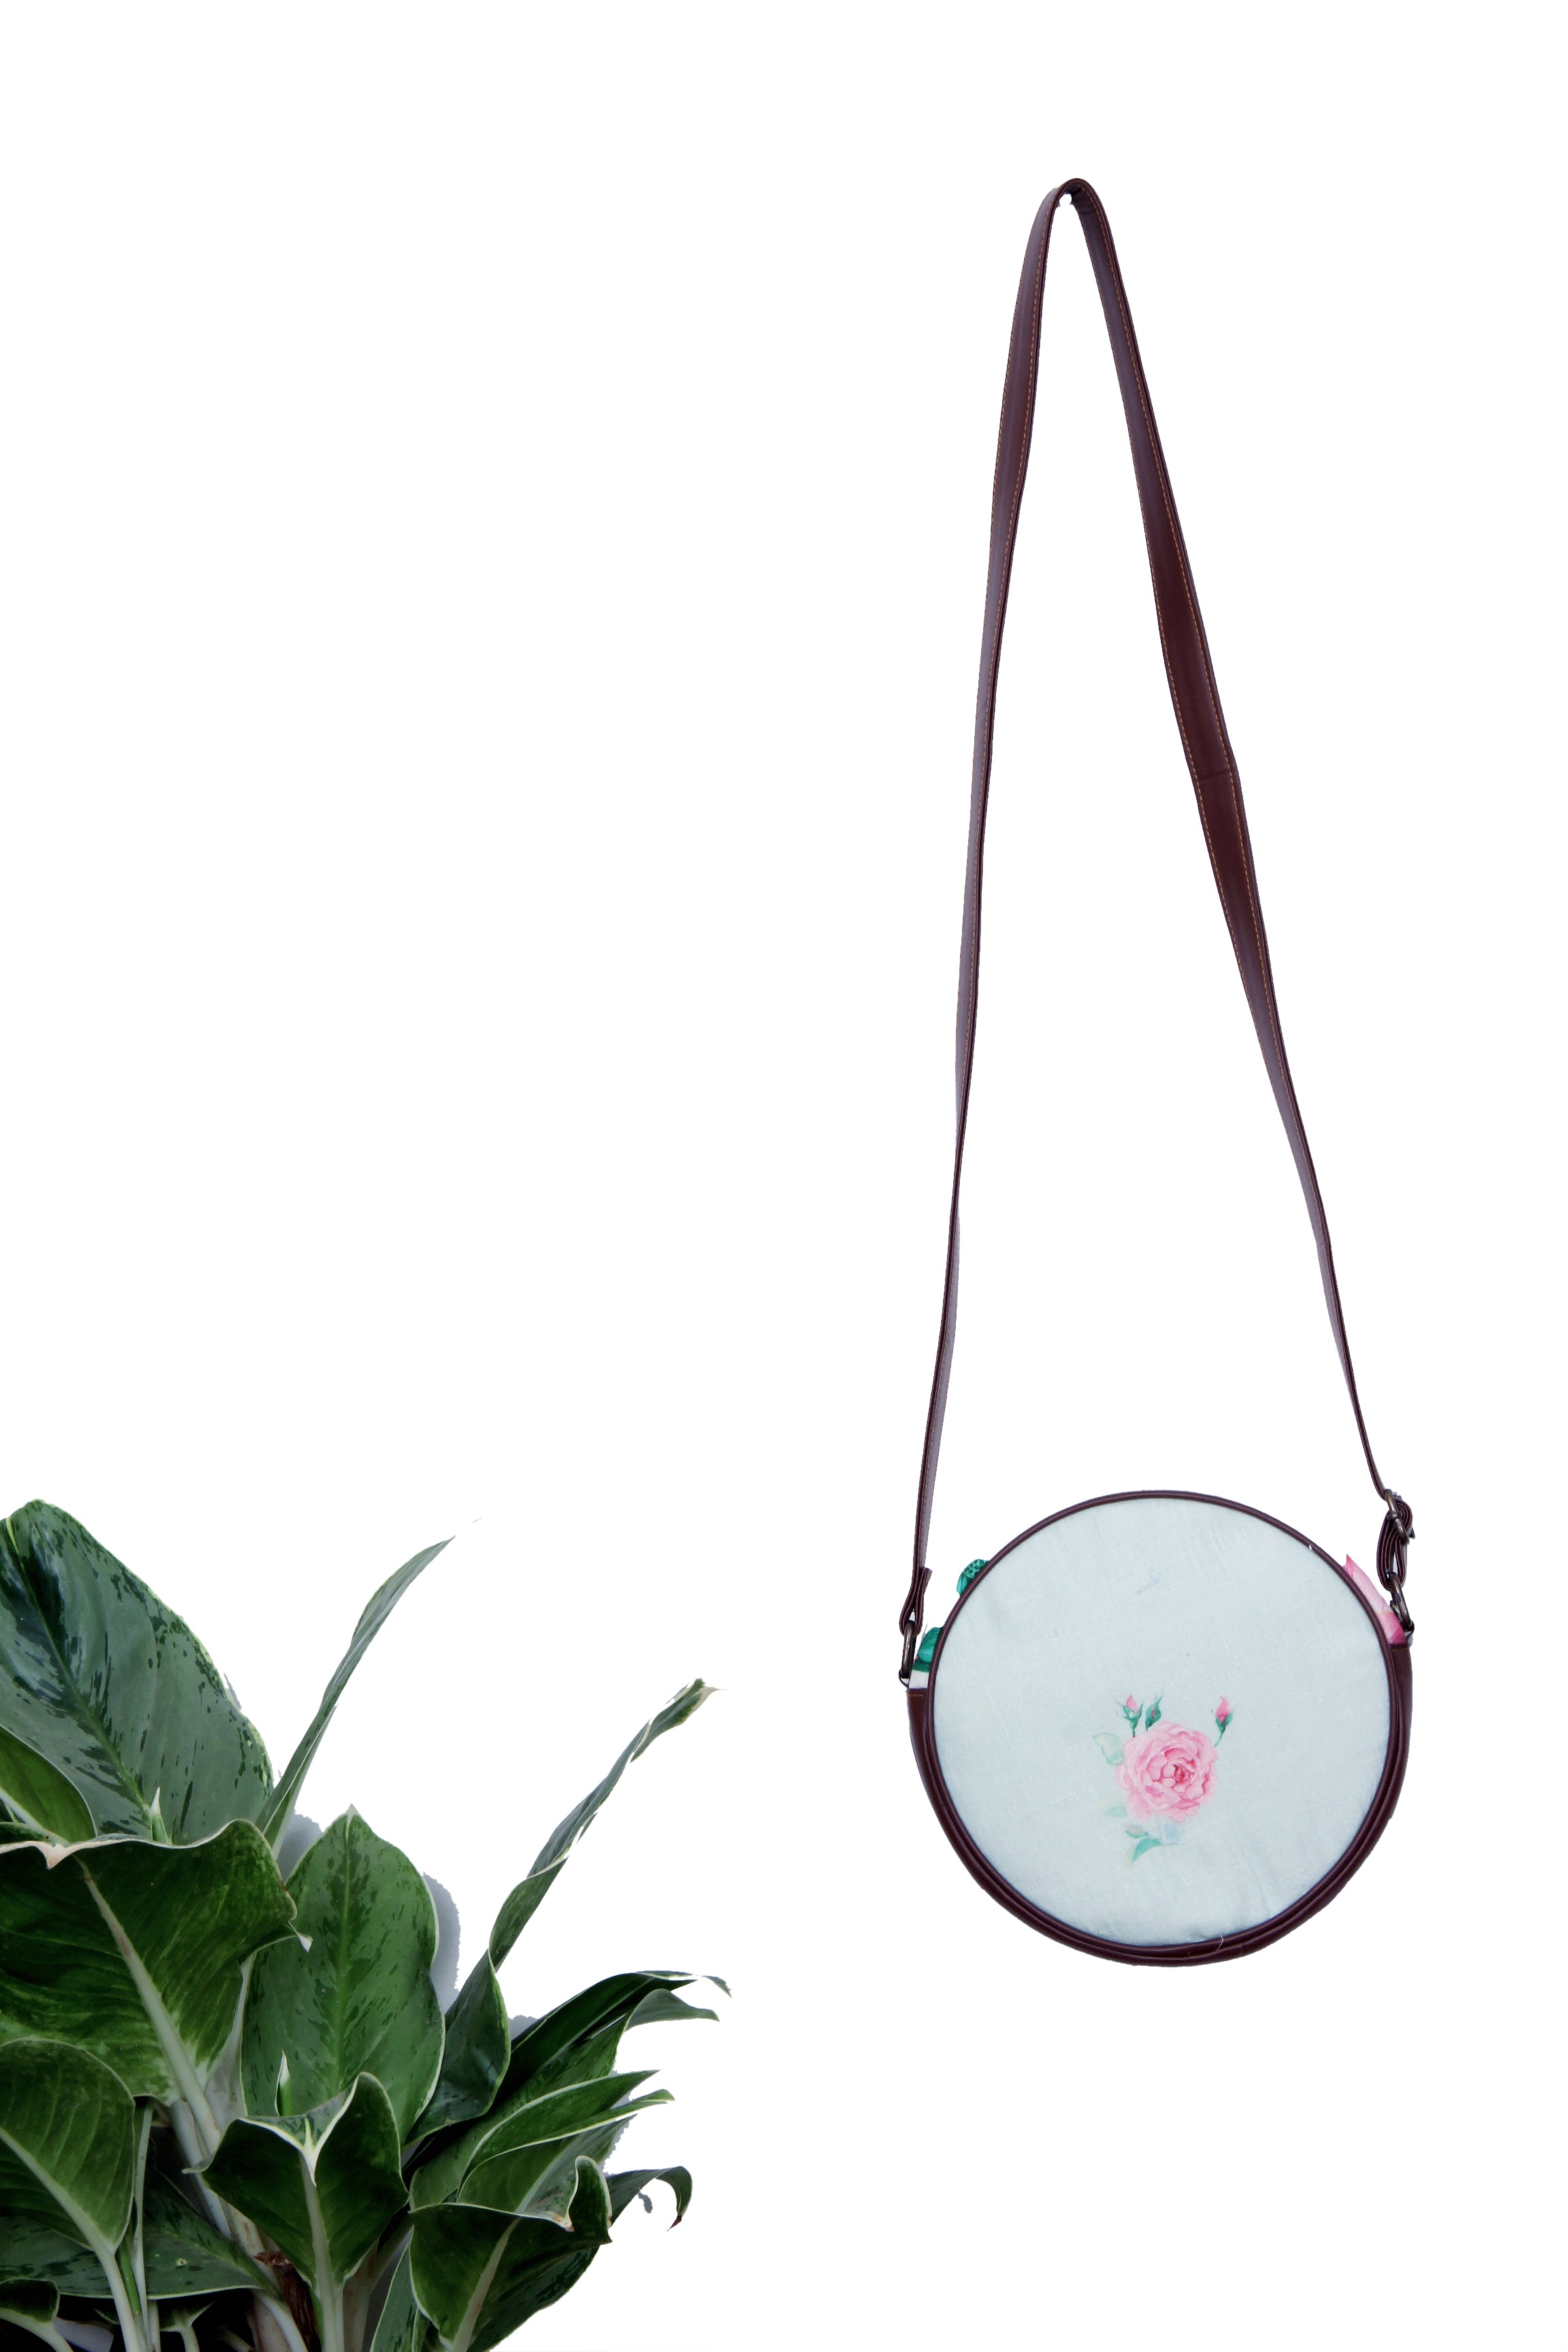 Round Sling Bags In Linen And Faux Leather - Tina Eapen Design Studio